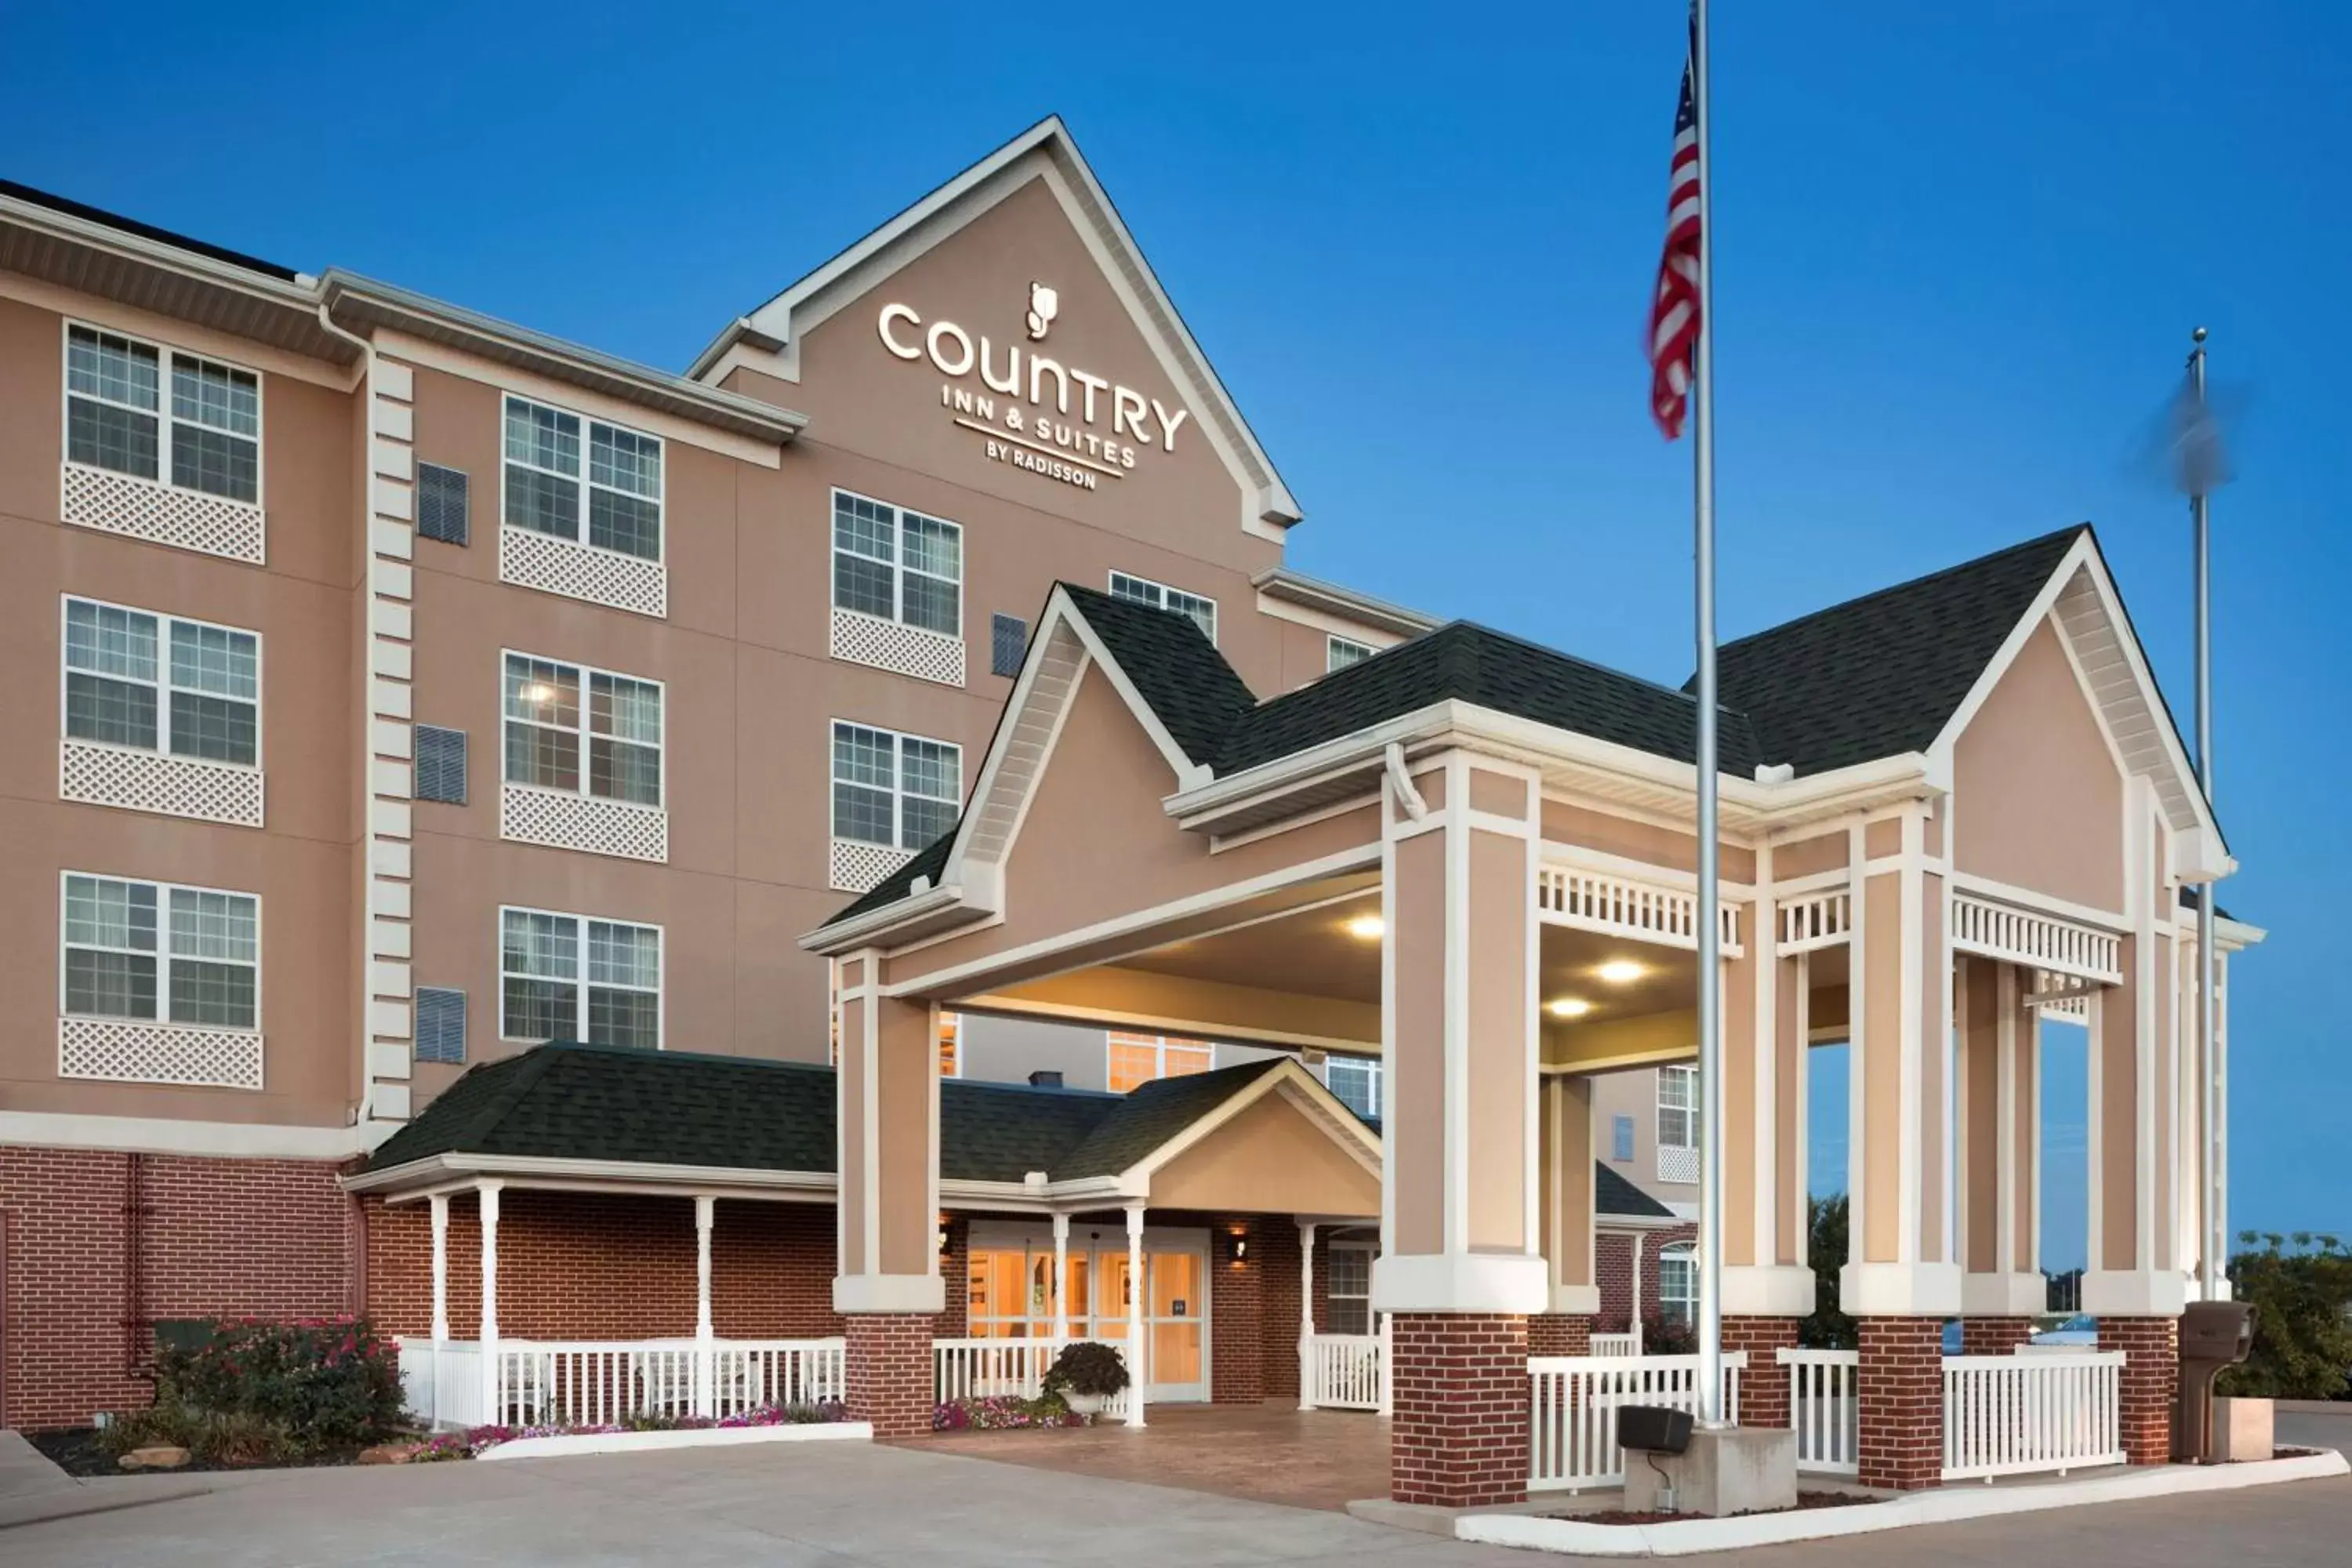 Property building in Country Inn & Suites by Radisson, Bowling Green, KY